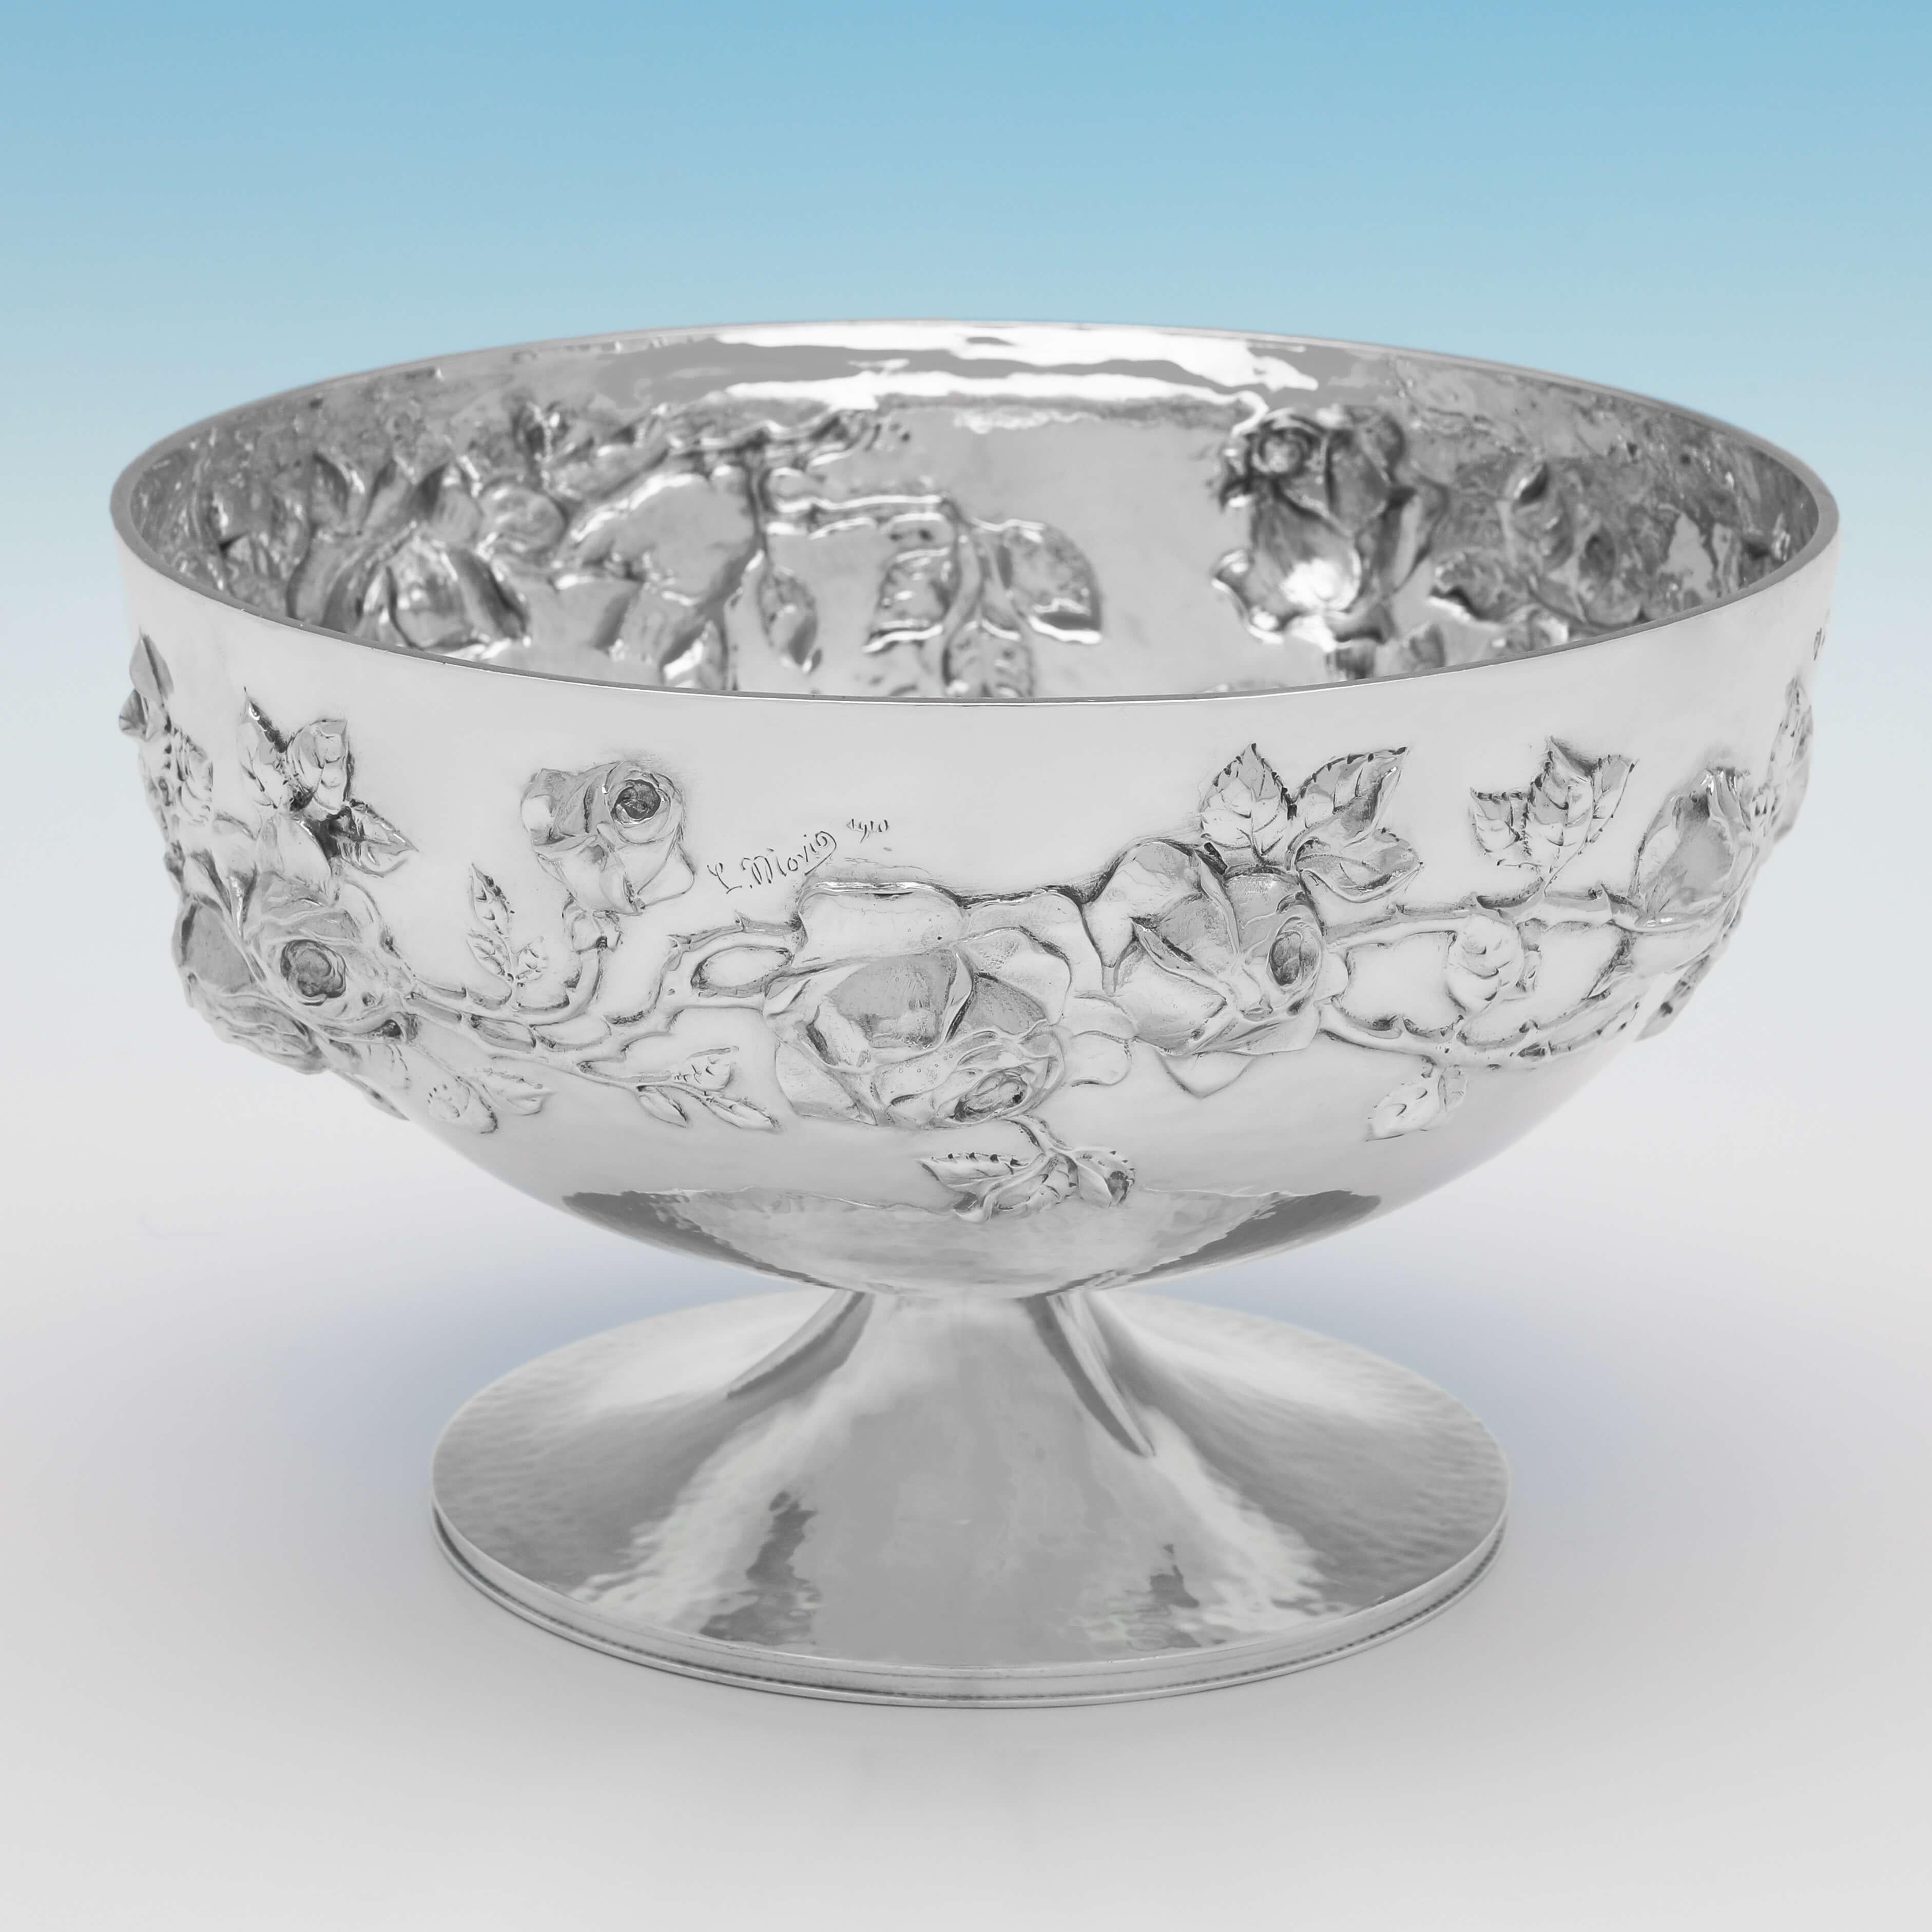 Designed by Latino Movio, and hallmarked in London in 1910 by Goldsmiths & Silversmiths Co., this stunning, Antique Sterling Silver Bowl, is in the Arts & Crafts taste, chased around the body with a floral motif. The bowl measures 5